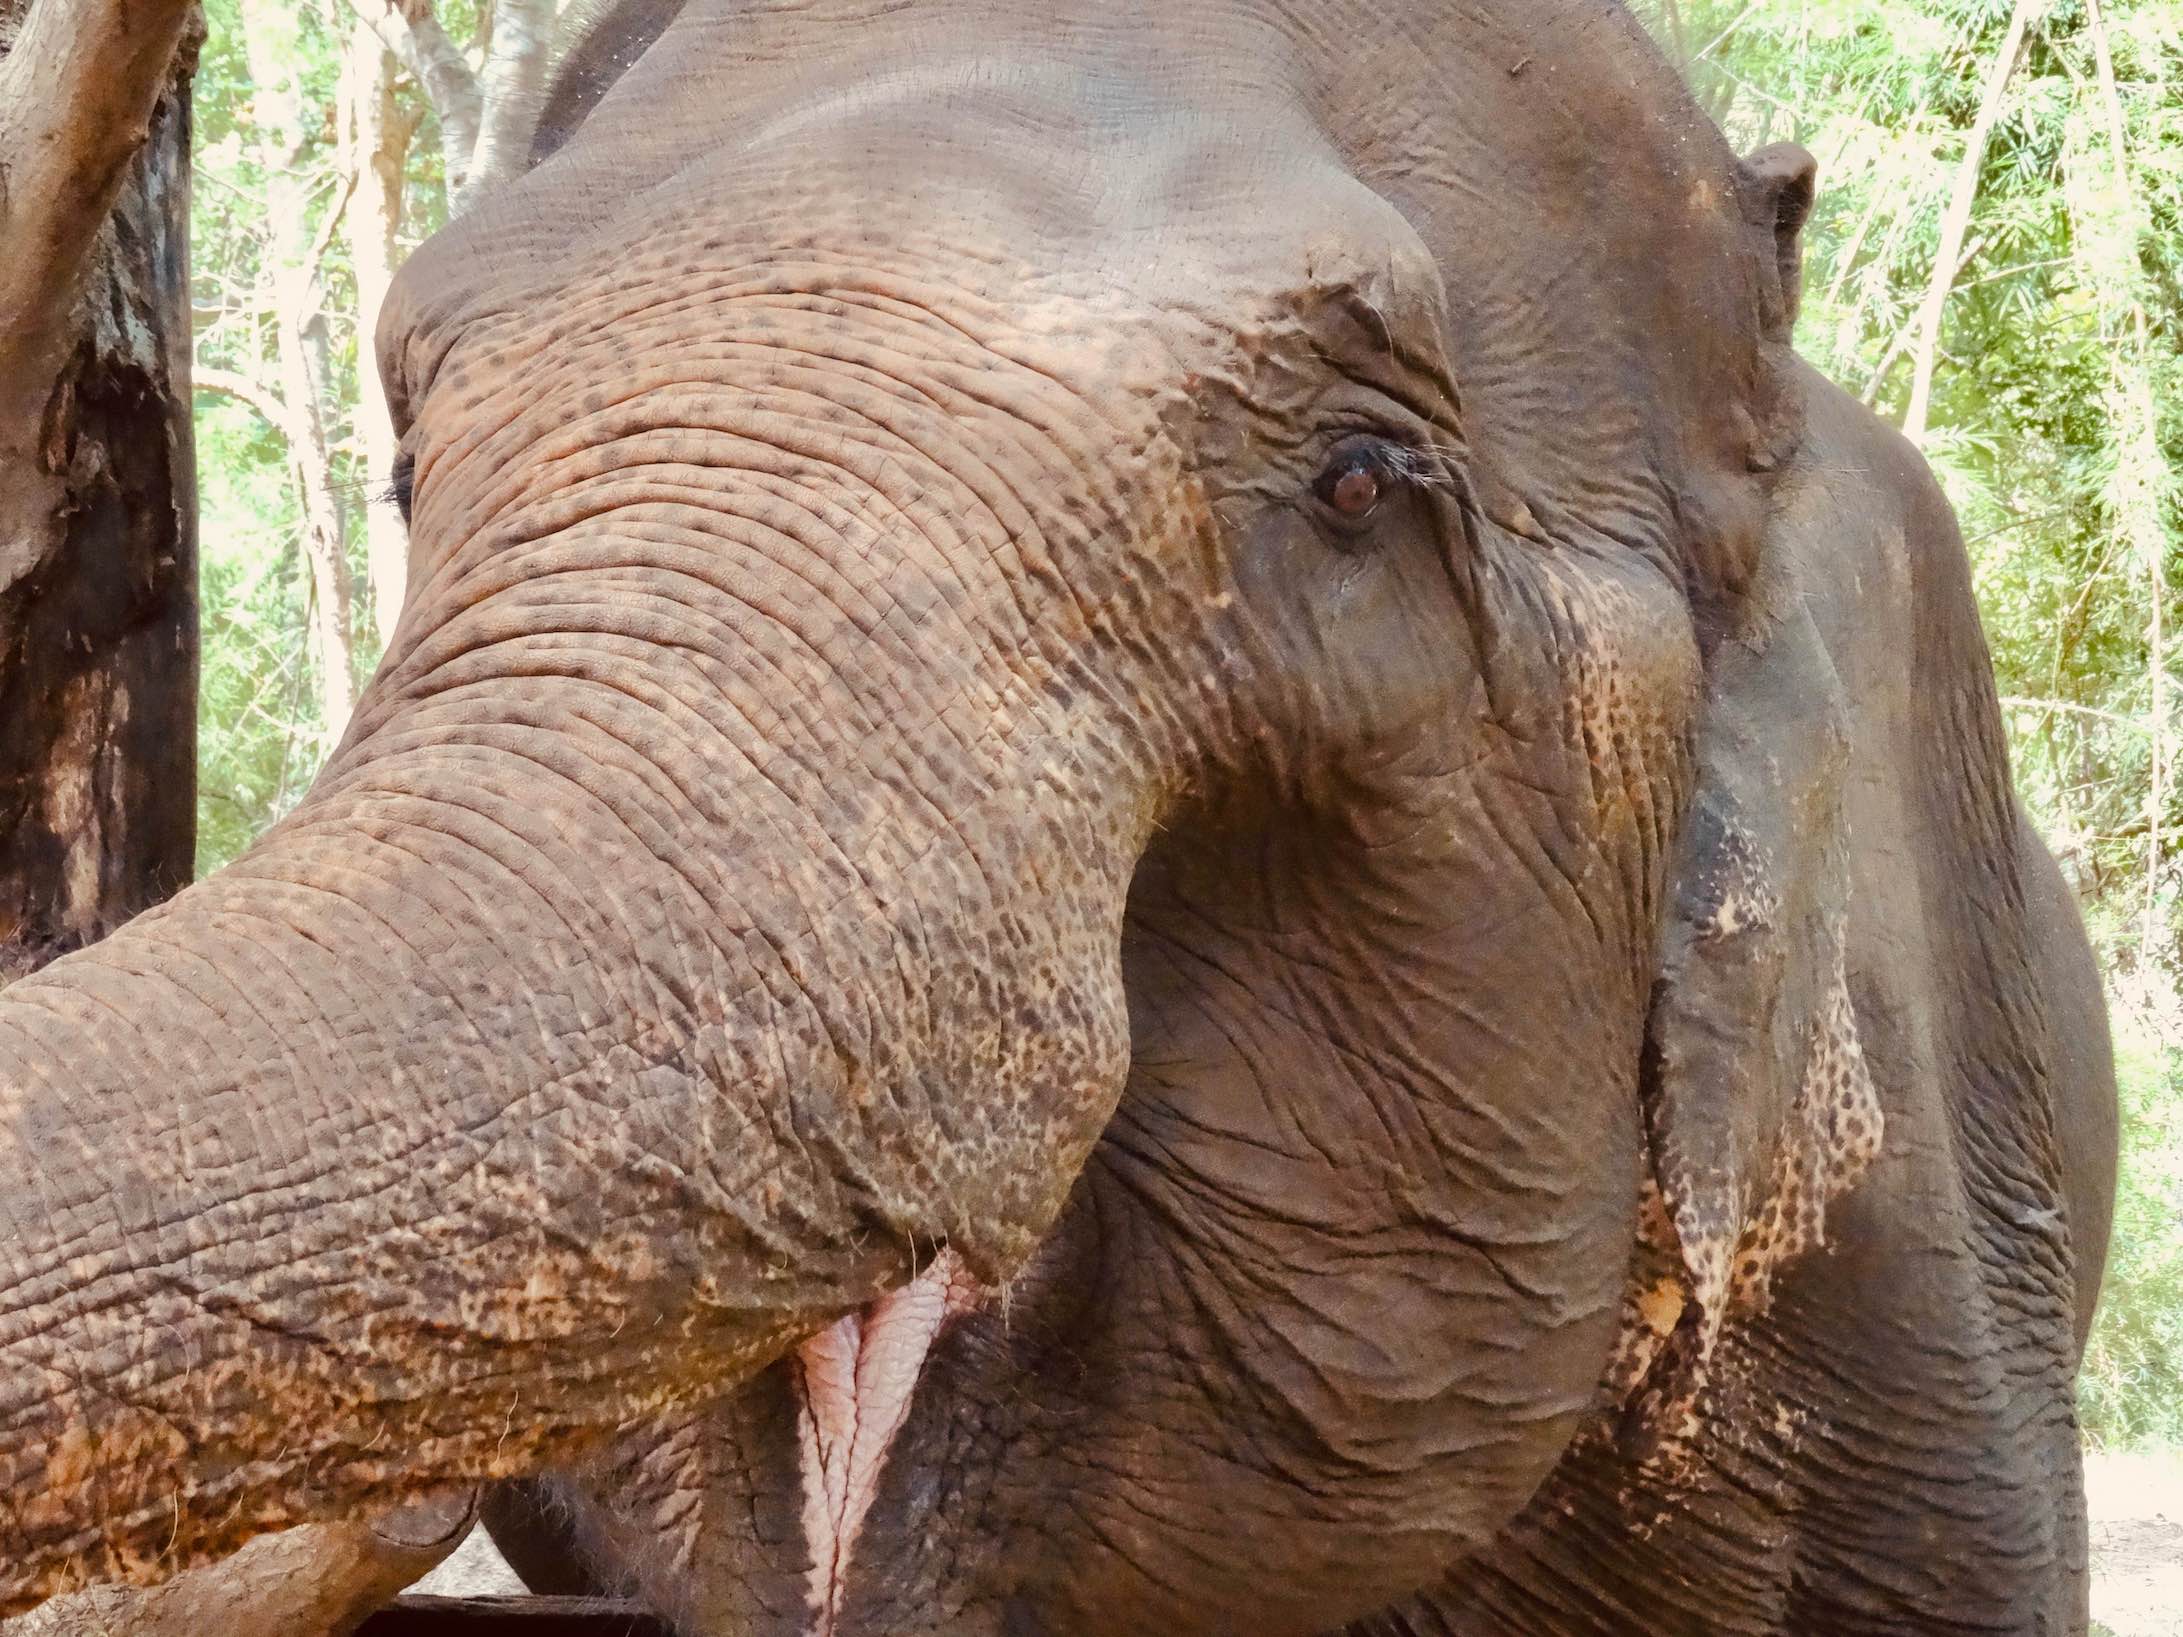 Meeting the elephants at ENP in Chiang Mai